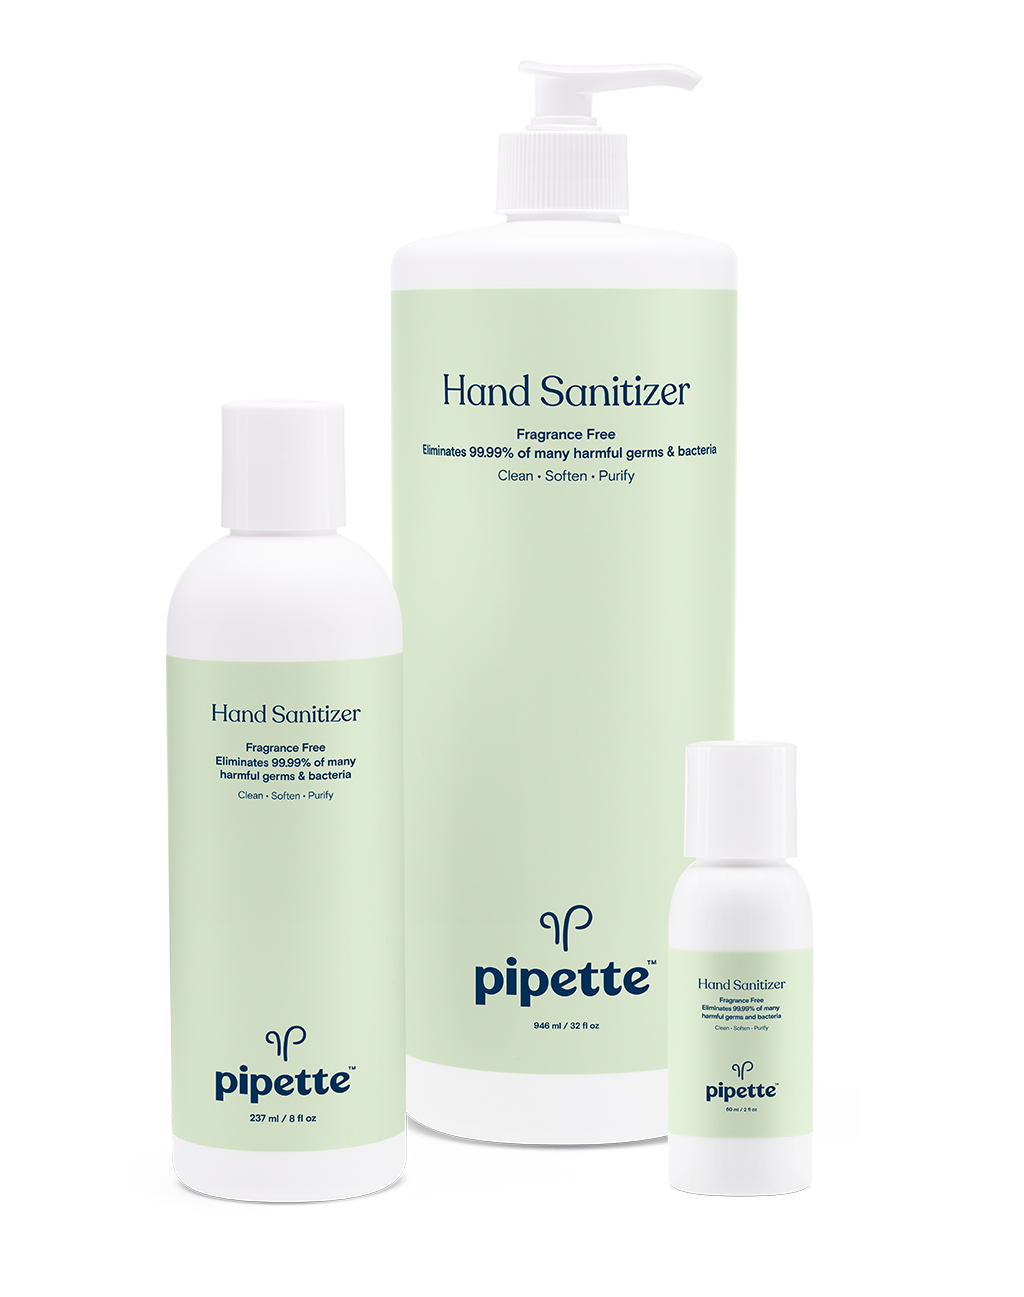 Hand Sanitizer Bundle with clean ingredients you can trust